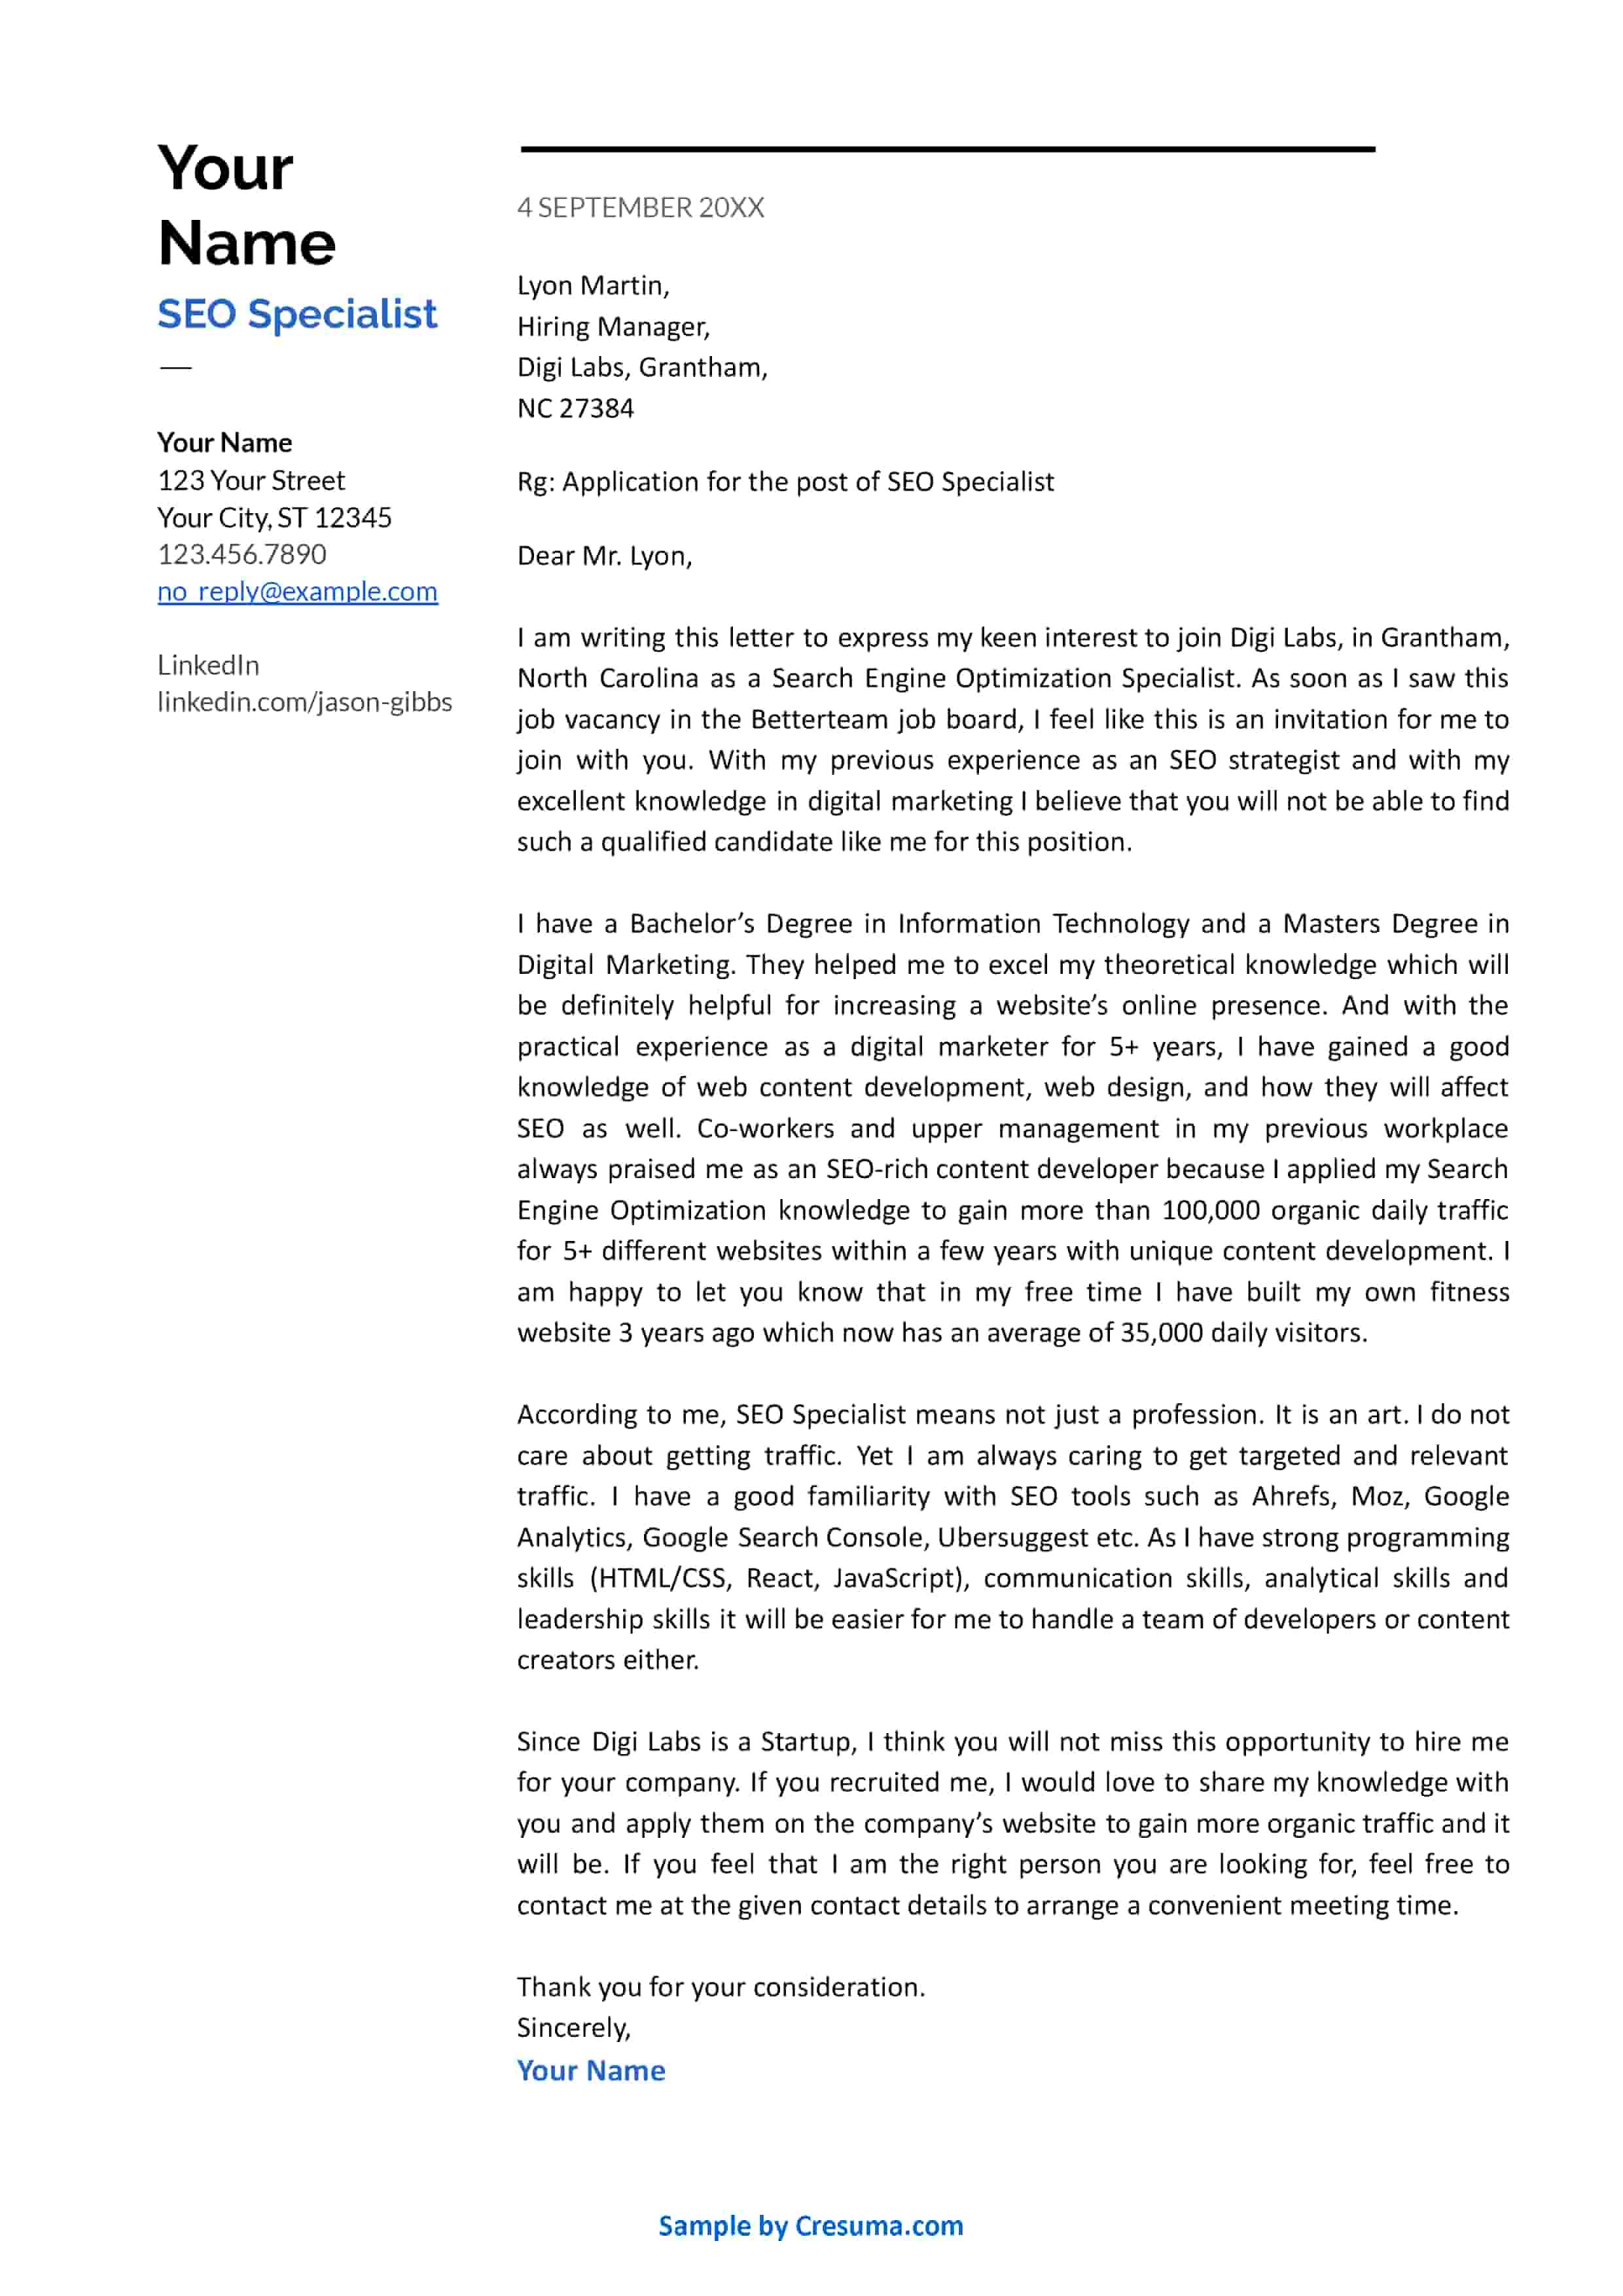 SEO Specialist cover letter sample template 5